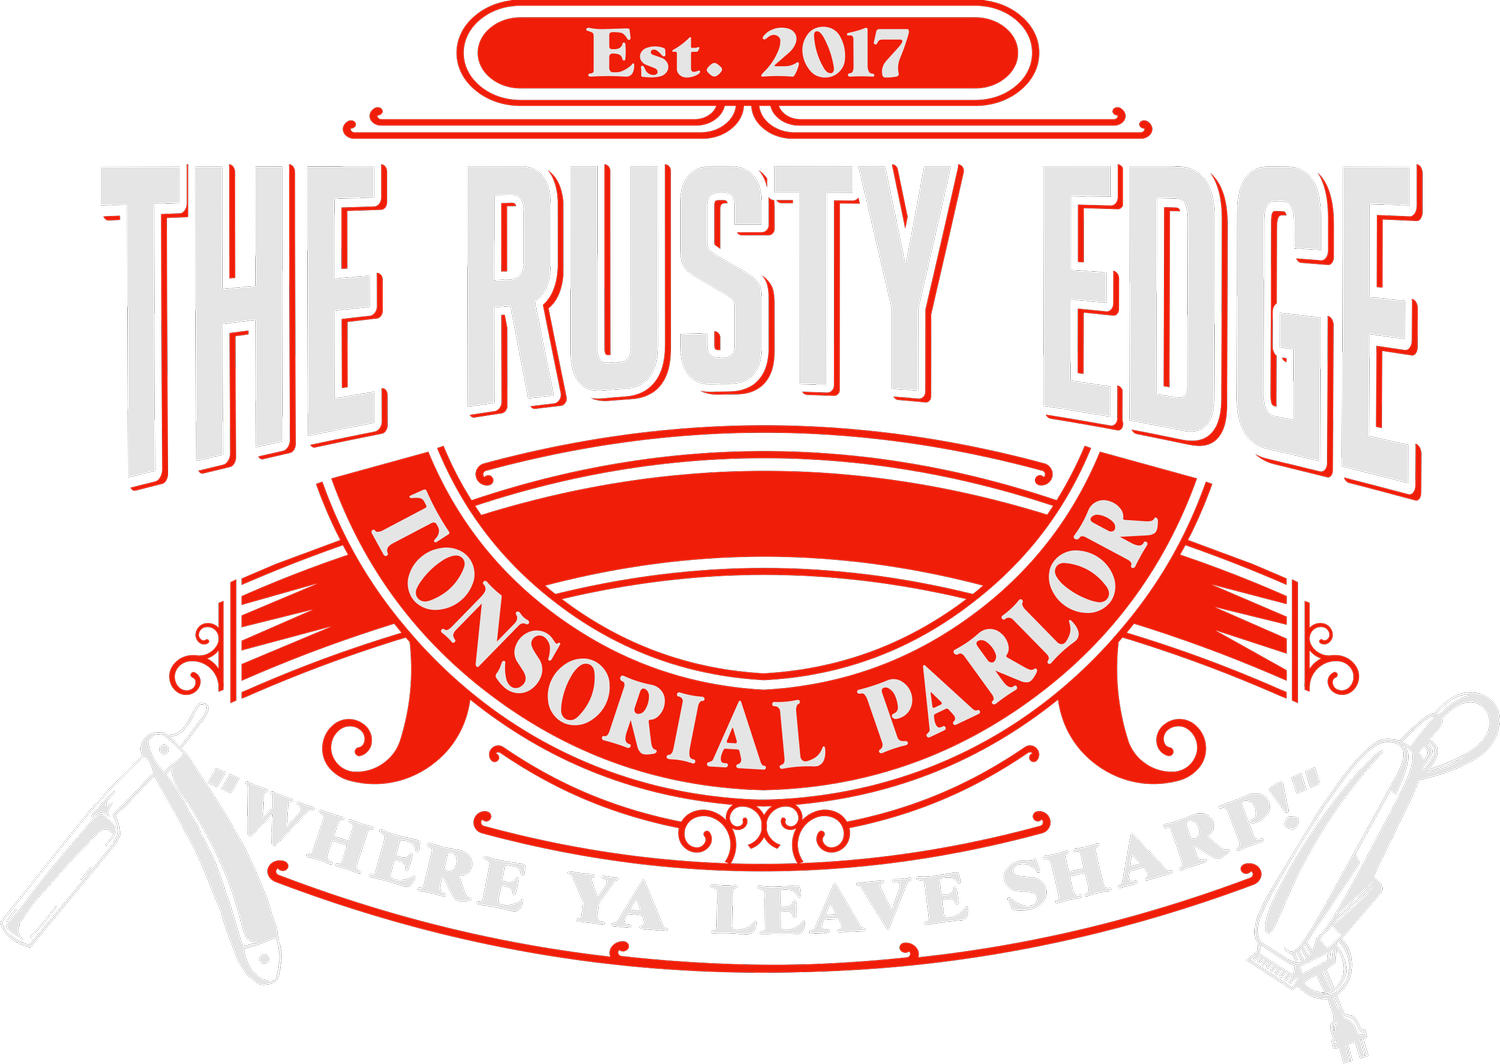 The Rusty Edge Tonsorial Parlor